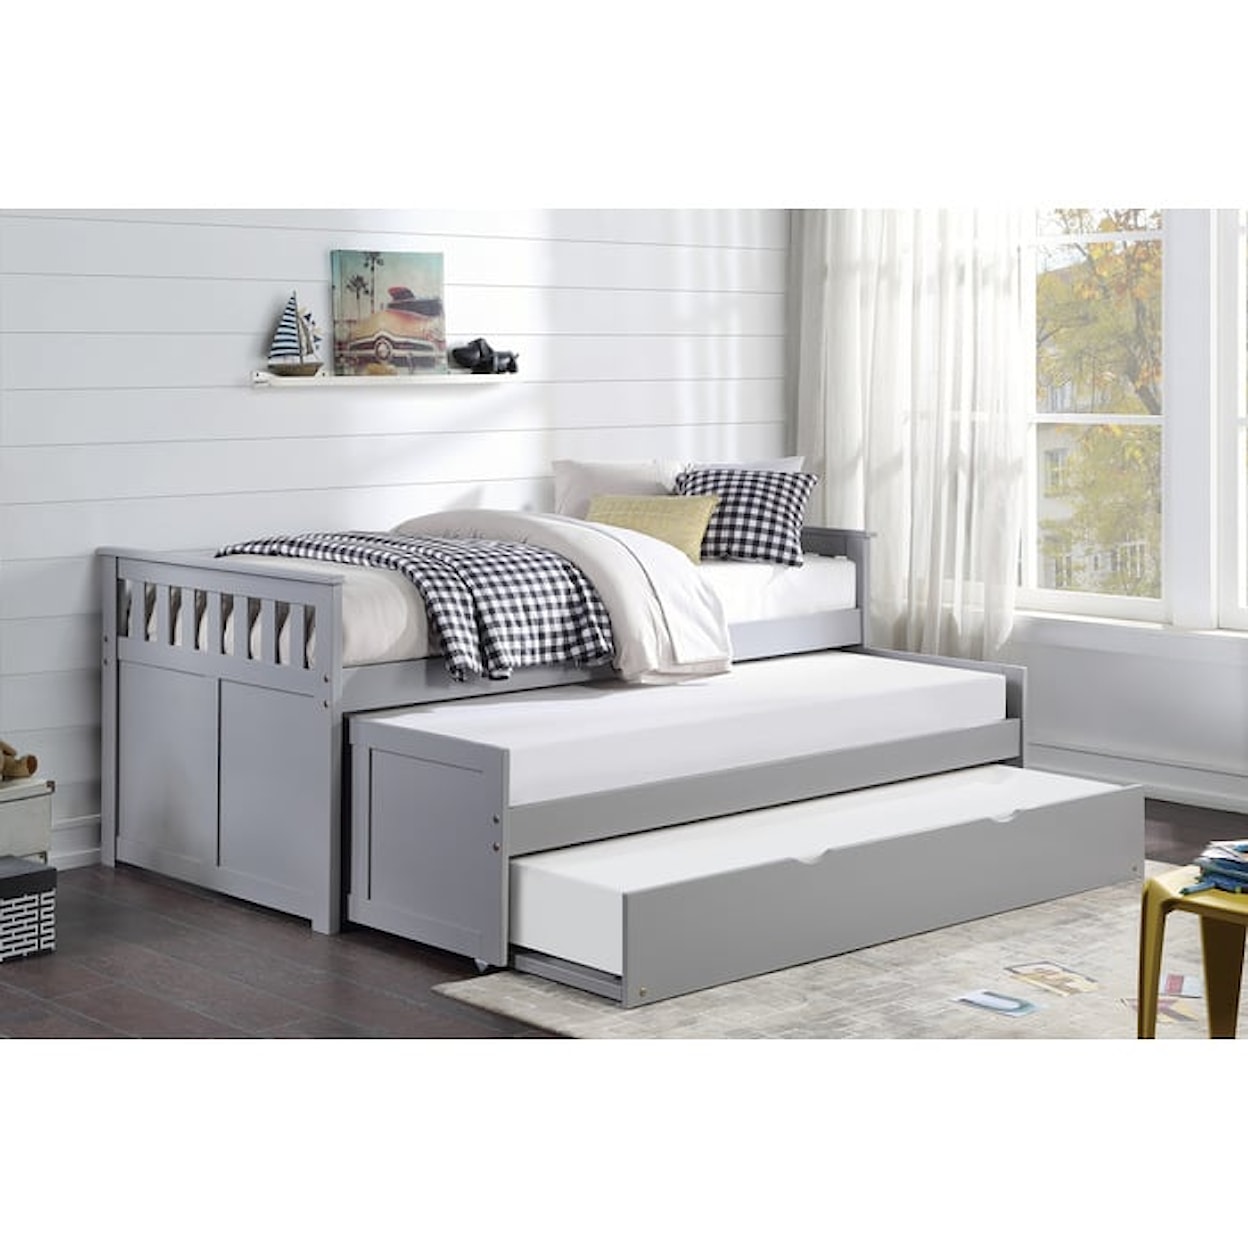 Homelegance Furniture Orion Twin Bed